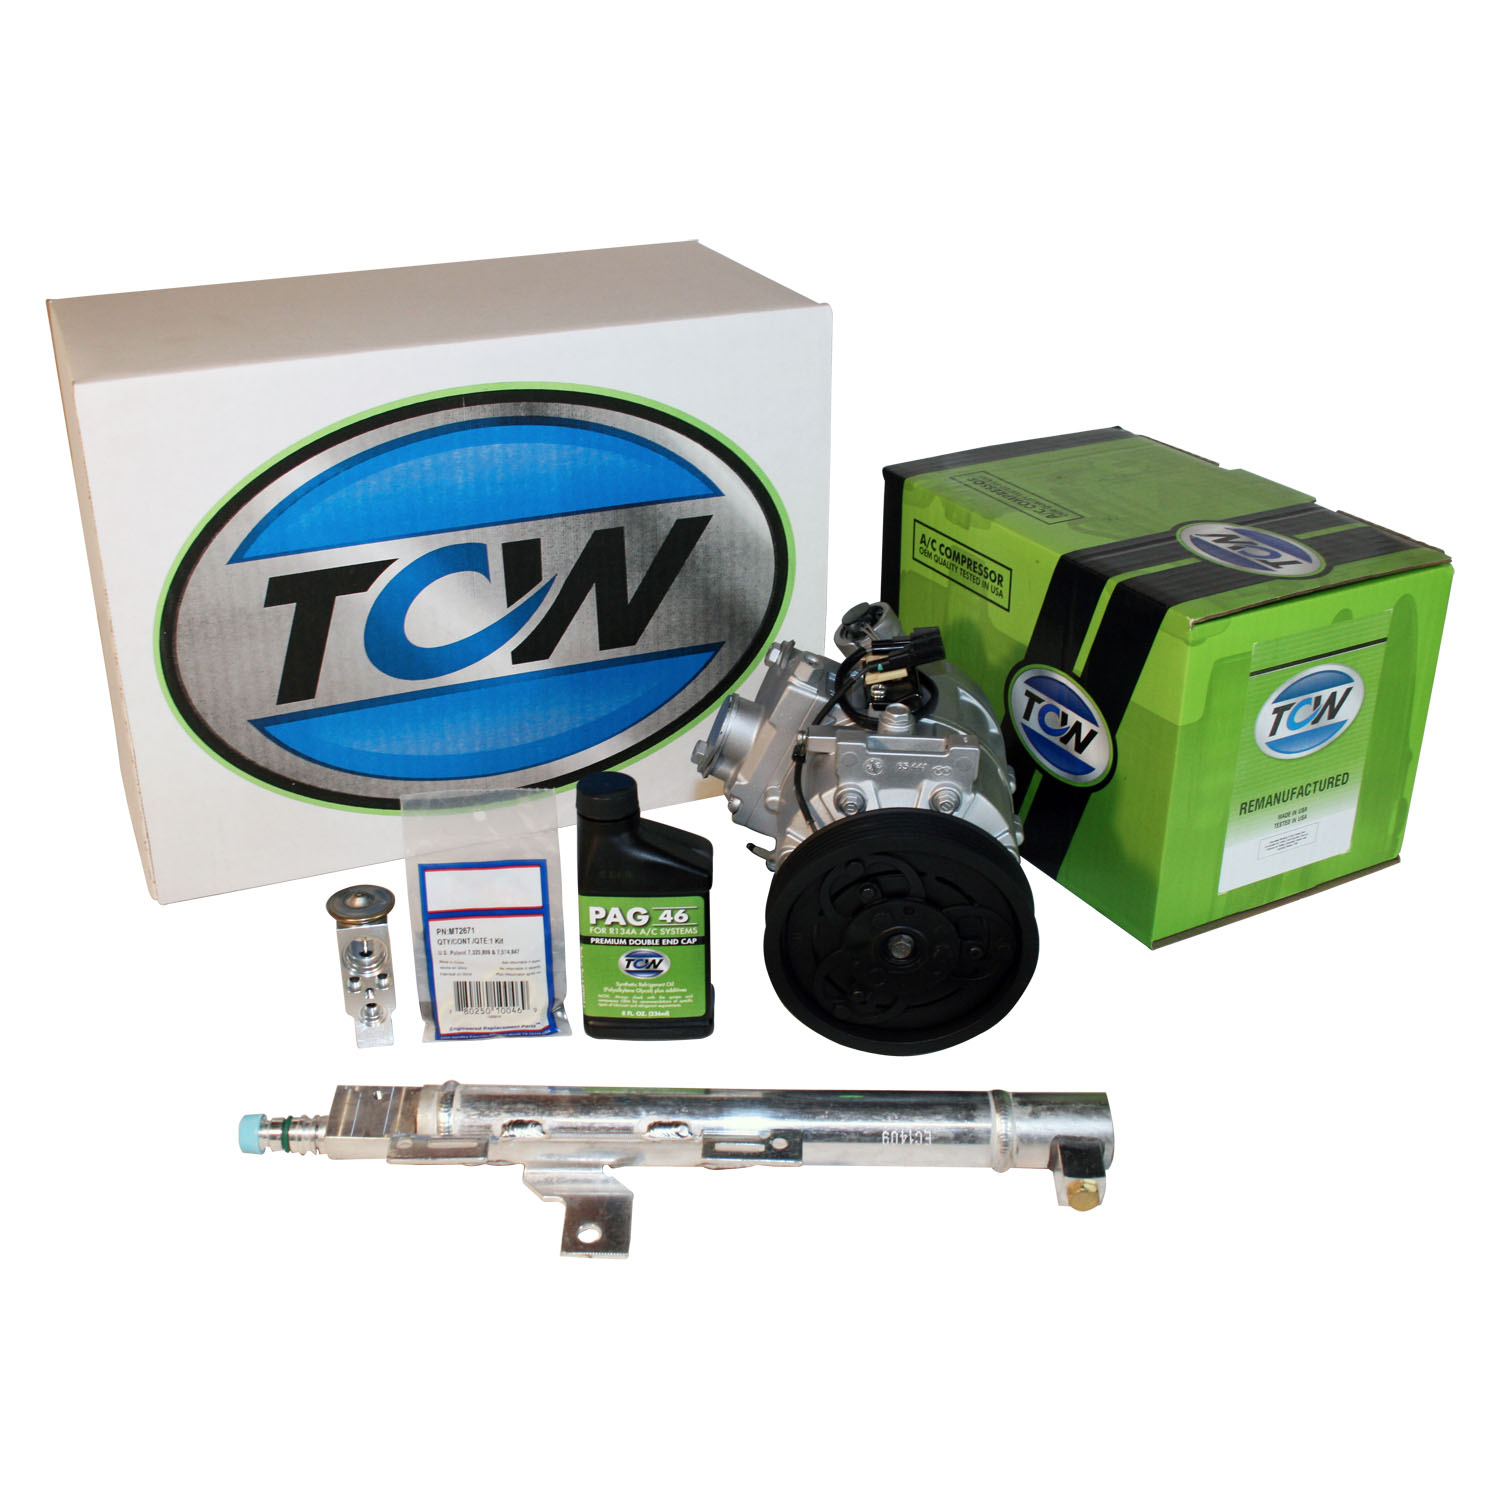 TCW Vehicle A/C Kit K1000478R Remanufactured